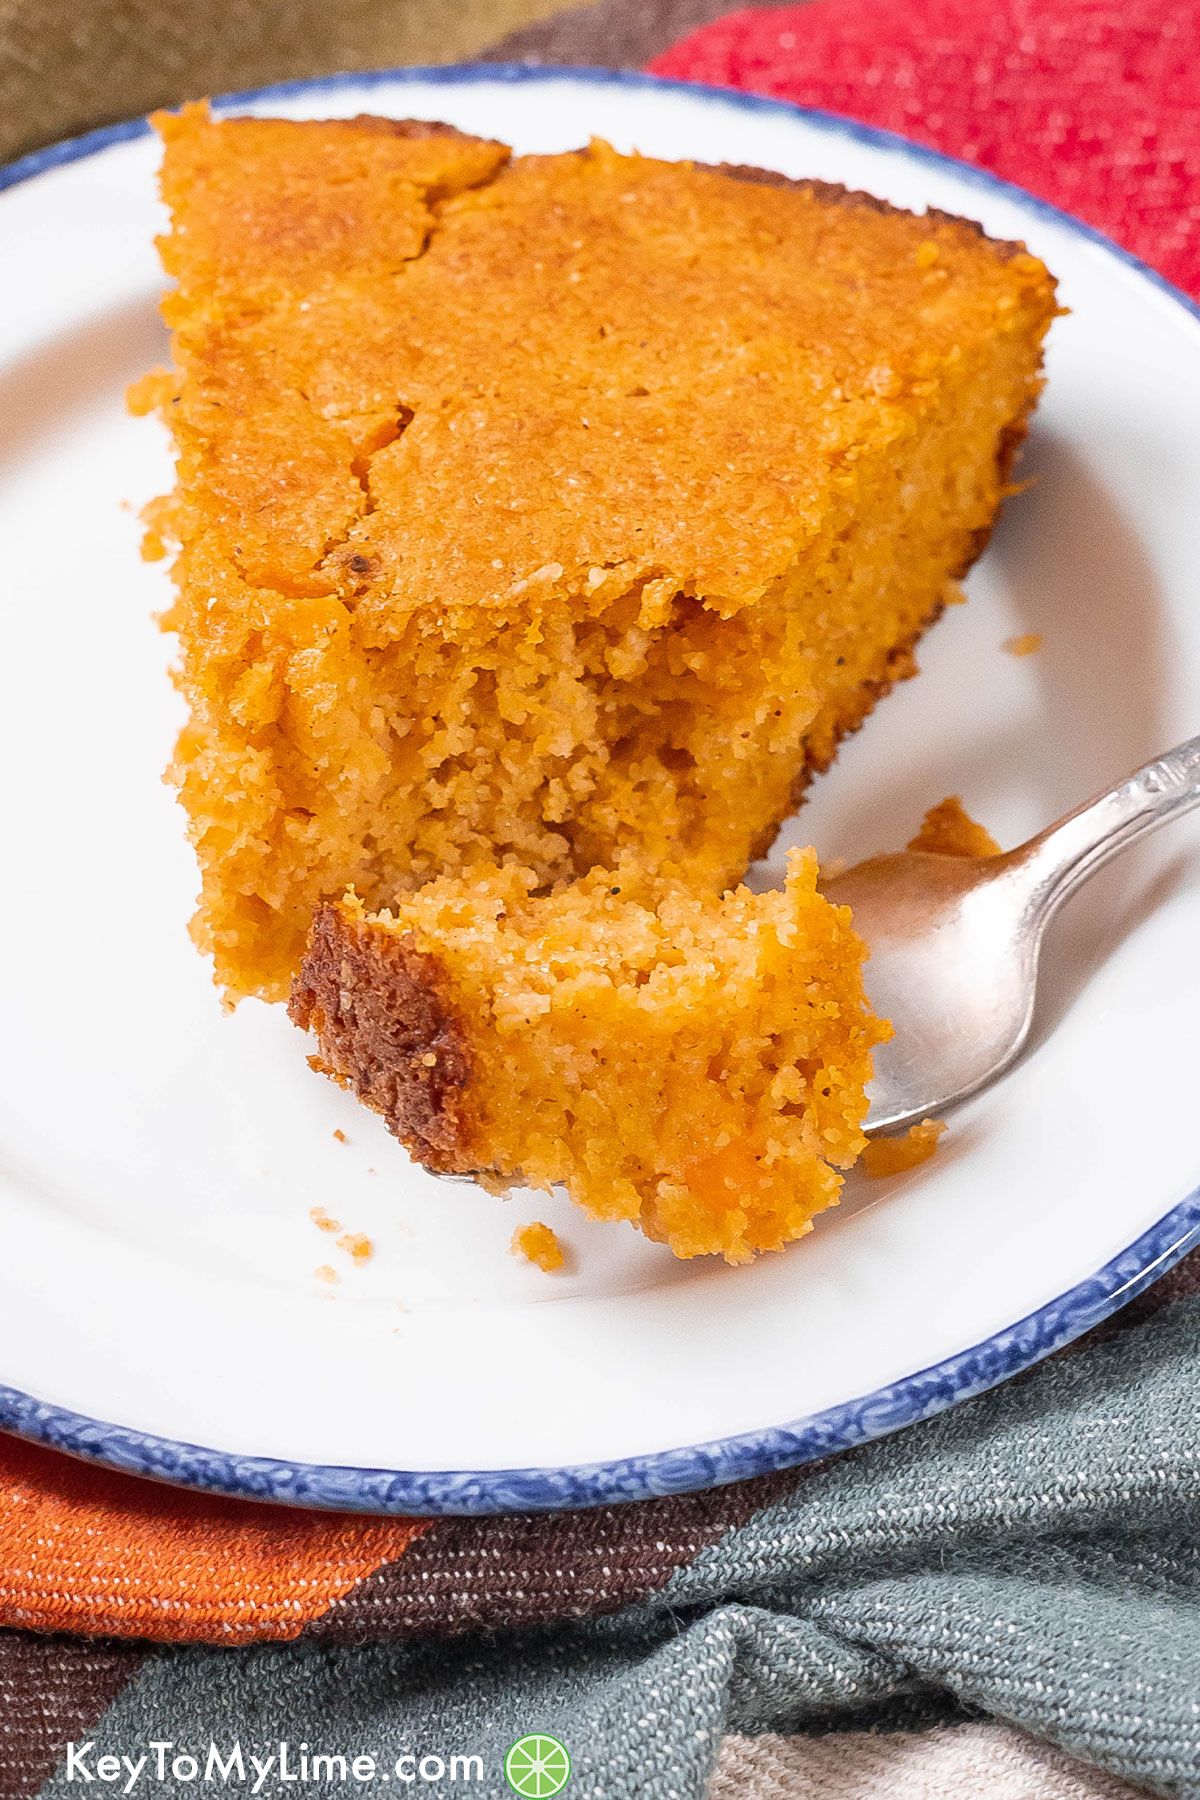 An image showing the texture of the cornbread.